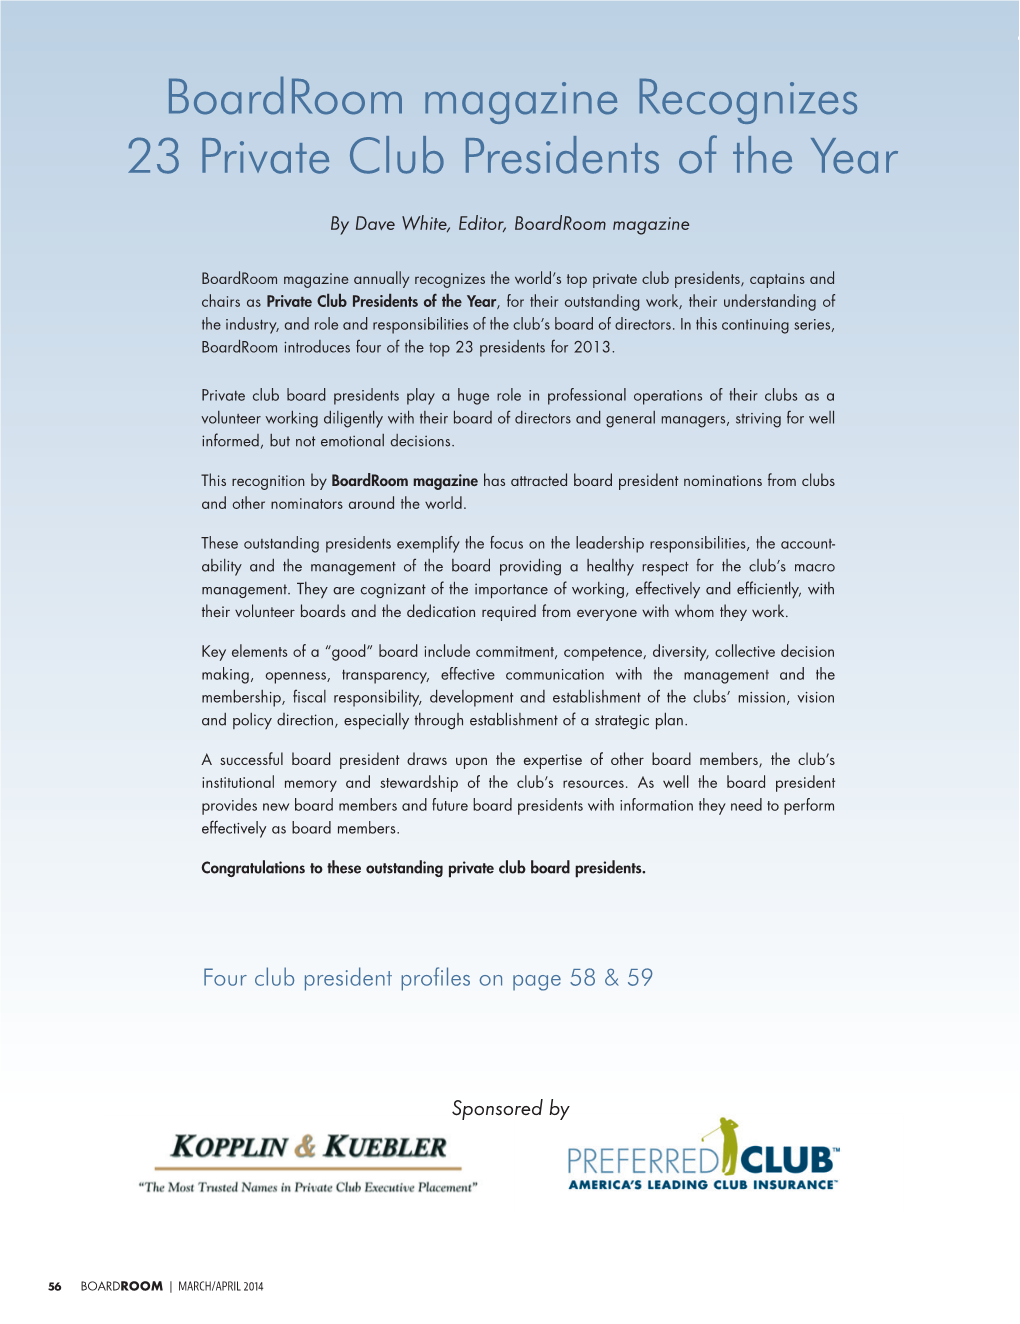 Boardroom Magazine Recognizes 23 Private Club Presidents of the Year